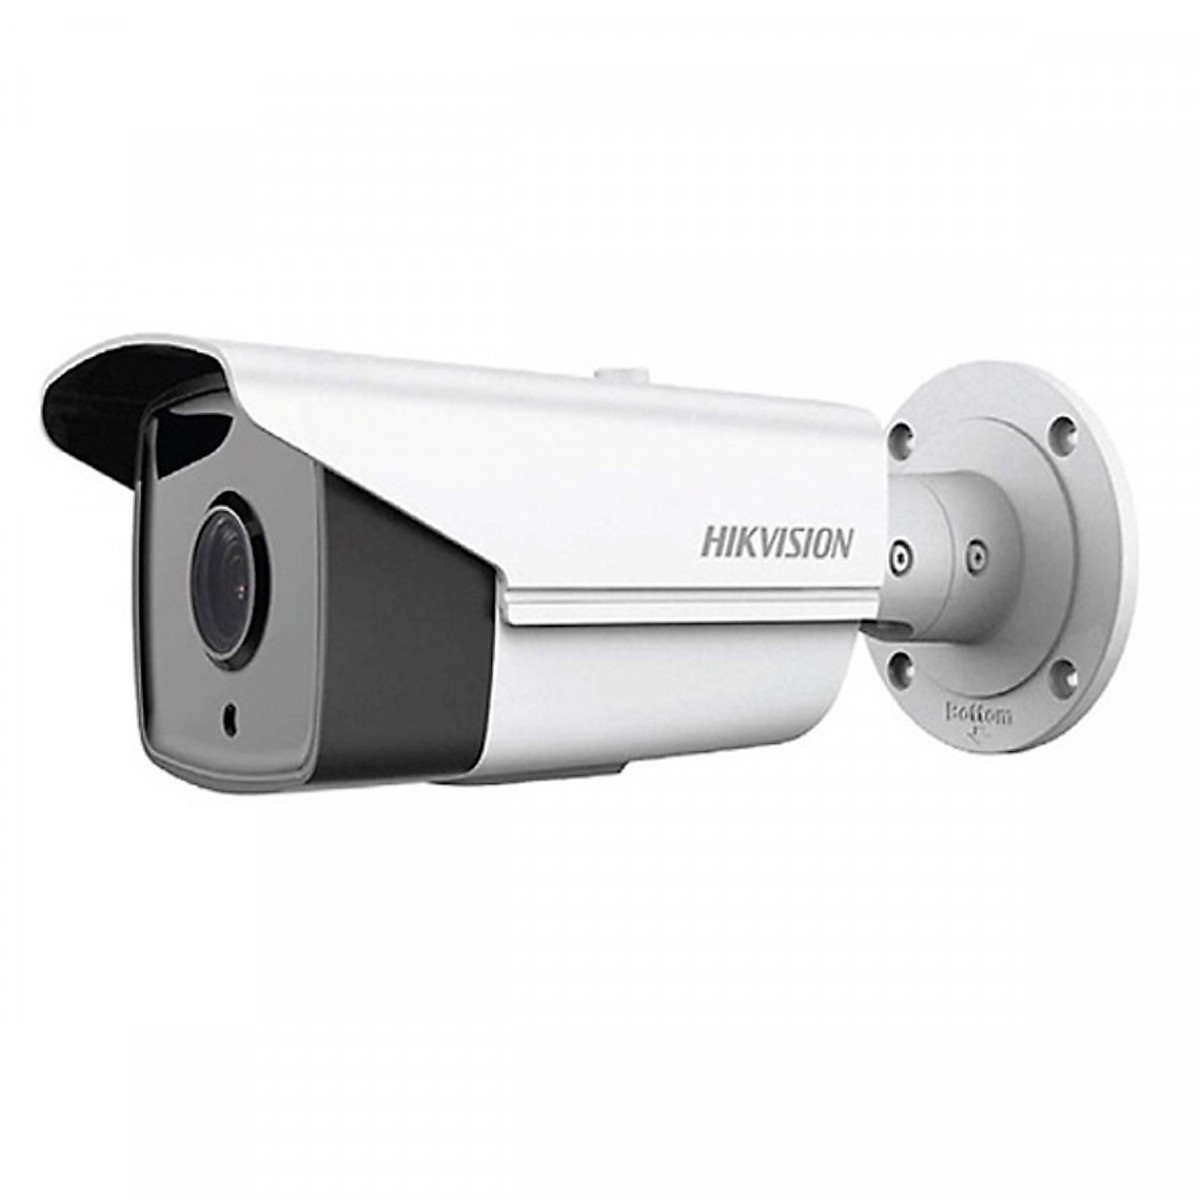 Camera Hikvision DS-2CE16D9T-AIRAZH